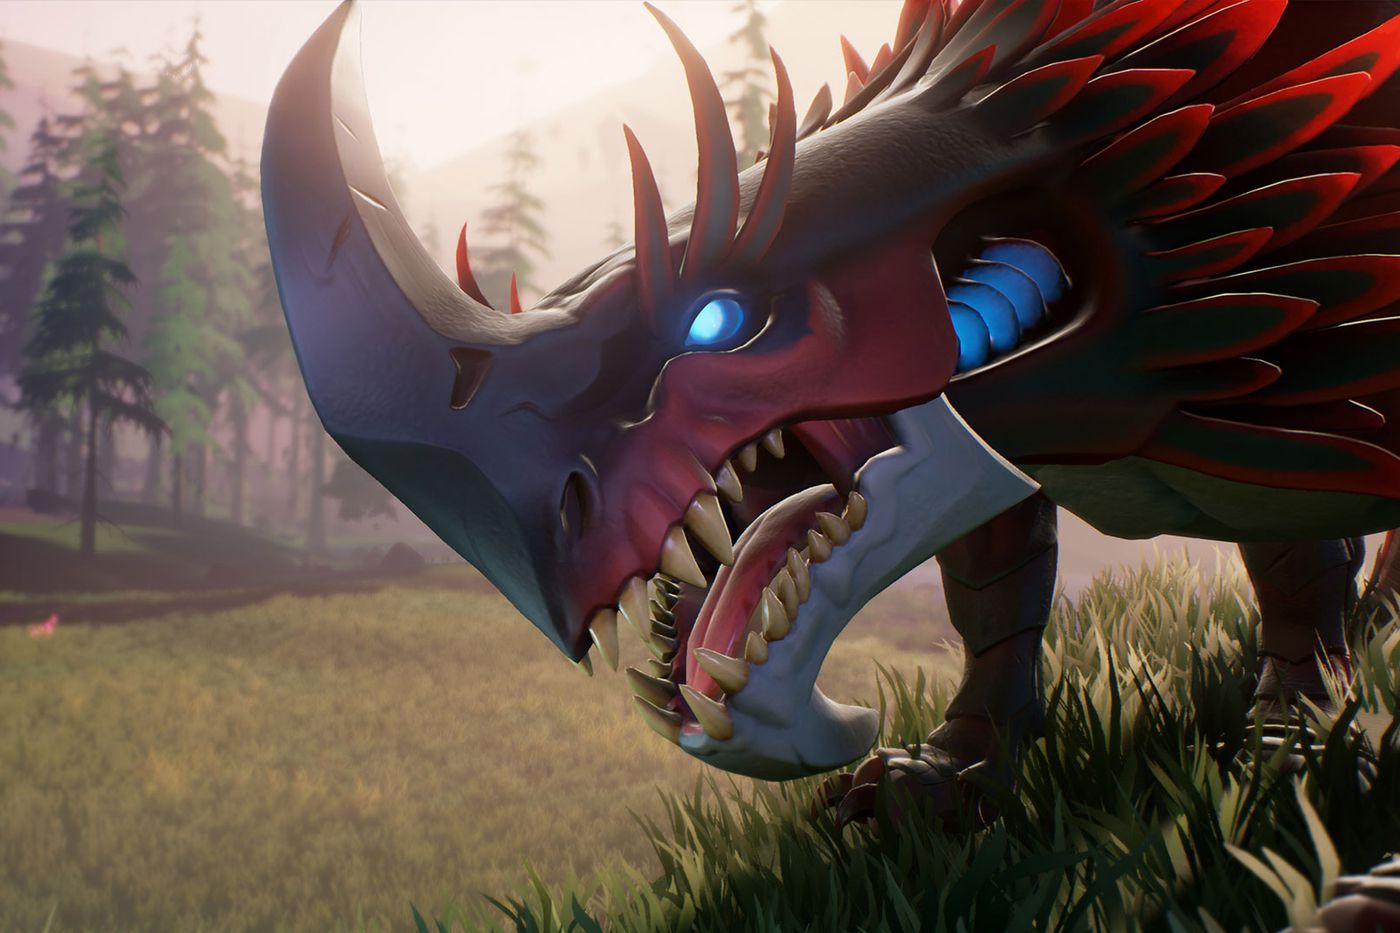 Monster hunting game Dauntless coming to consoles, Epic